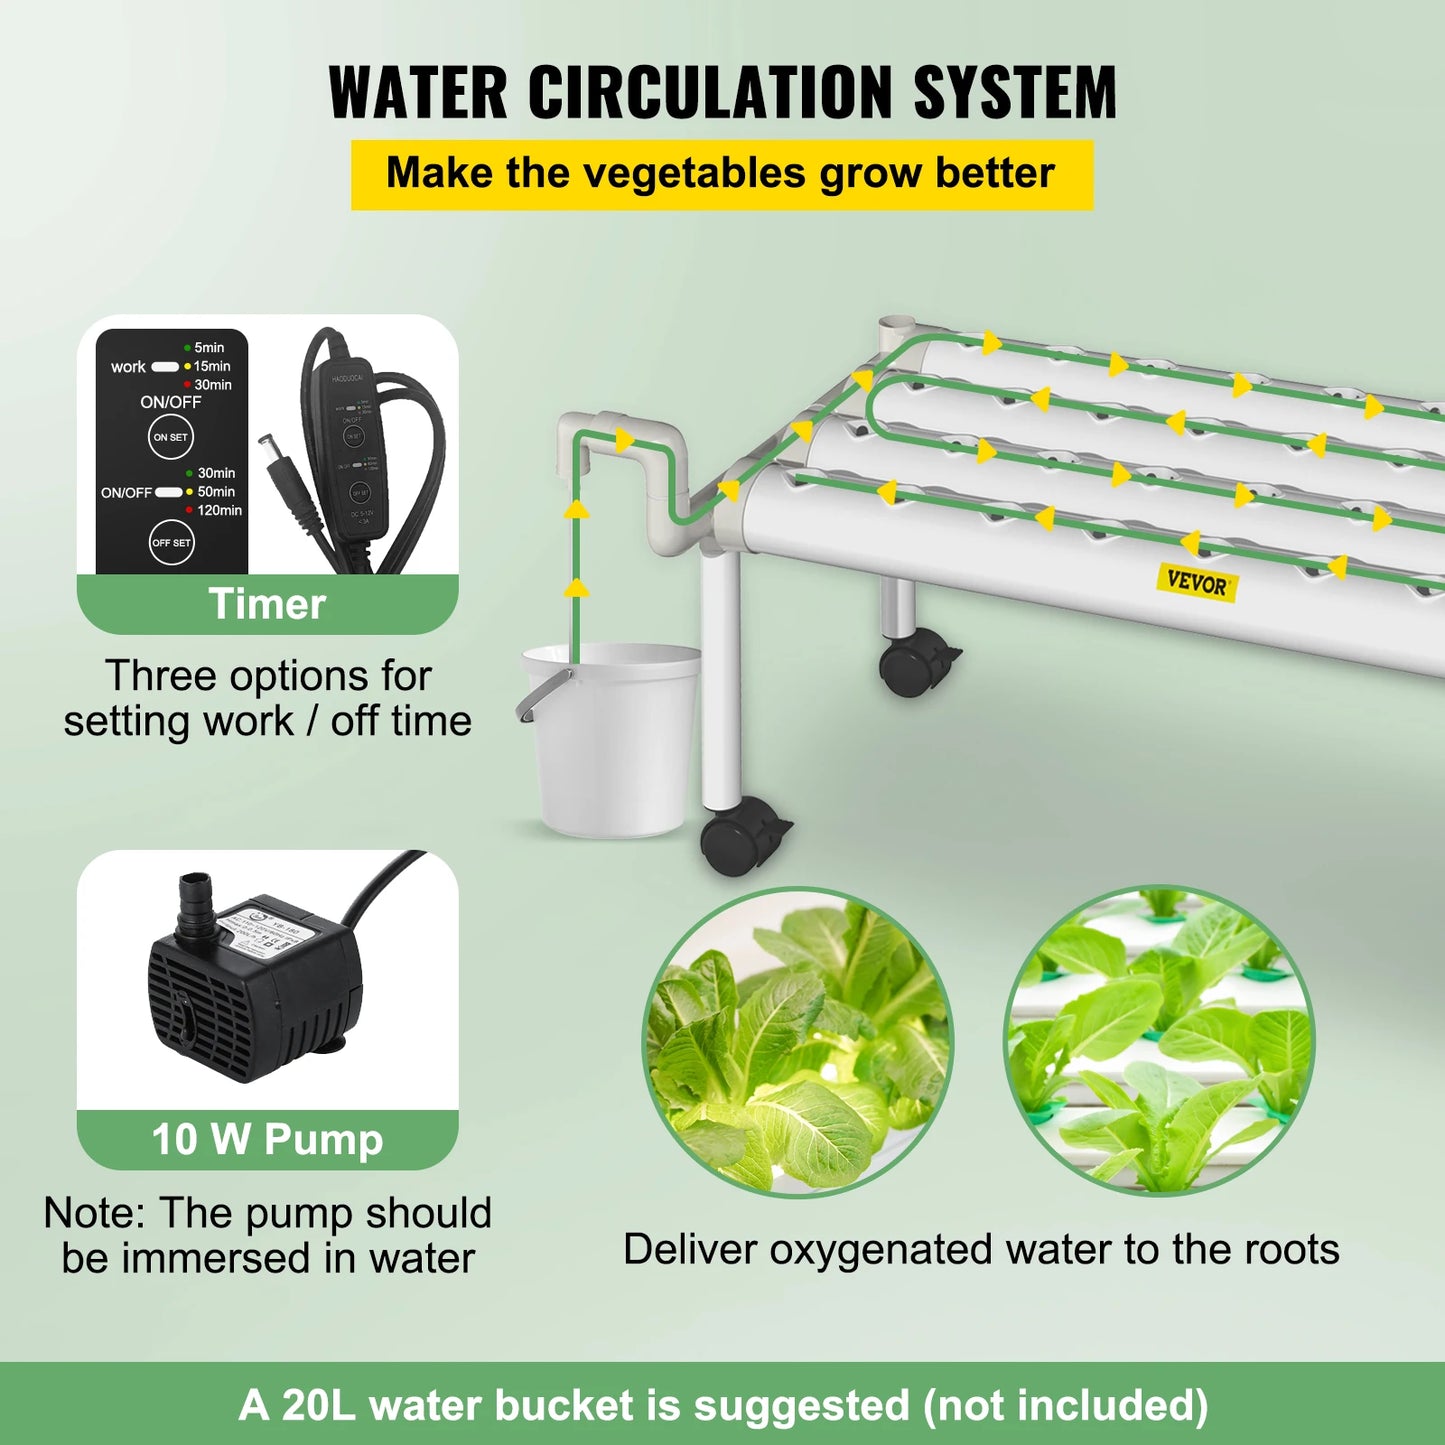 Cute Hydroponic Grow Kit System 1/2/3/4 Layers For Vegetables Lawn & Garden